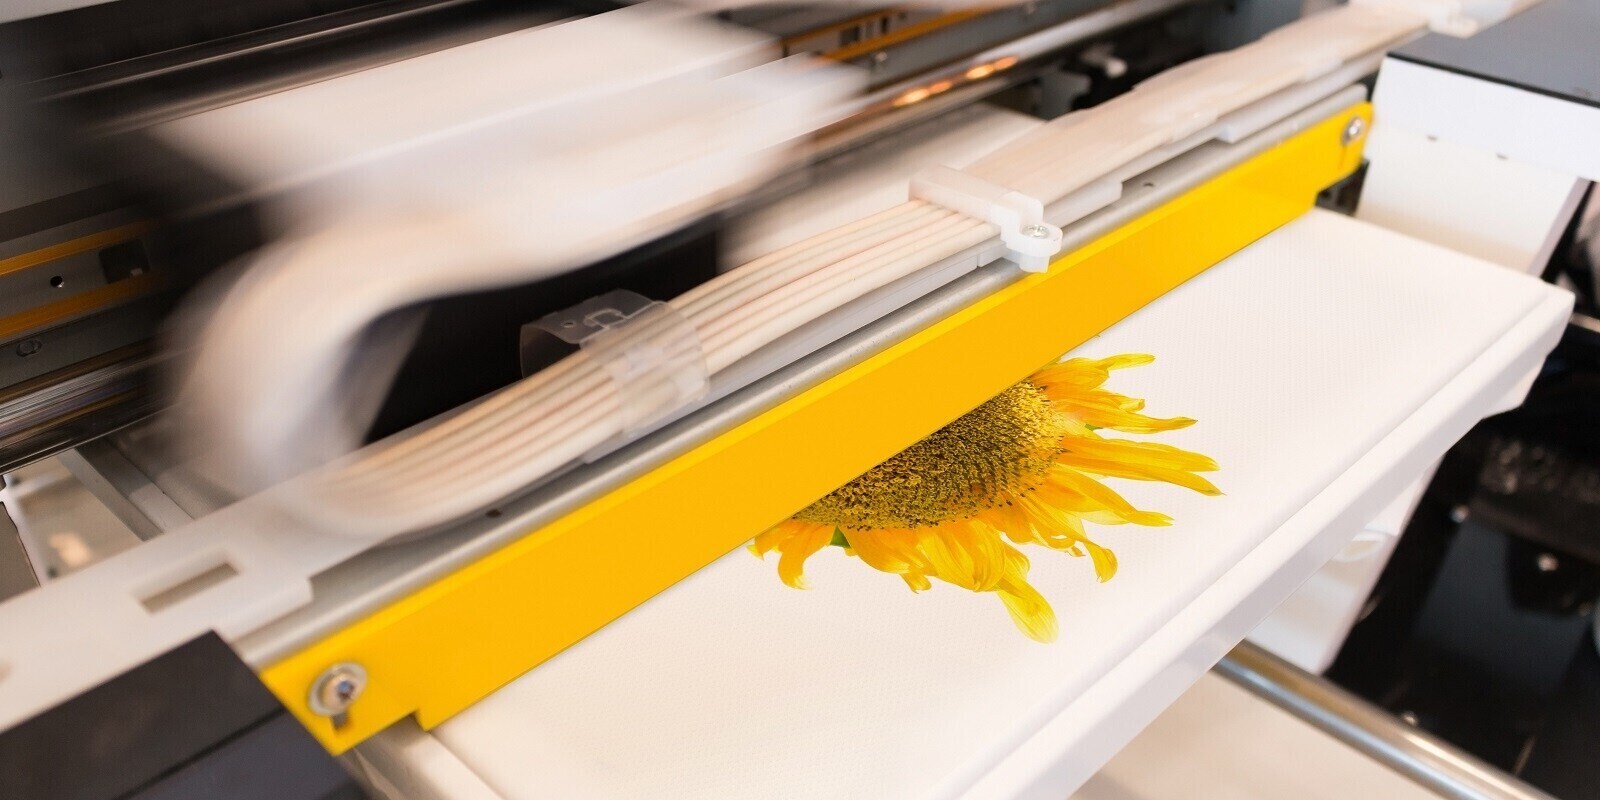 Future of Digital Printing on Paper Surfaces